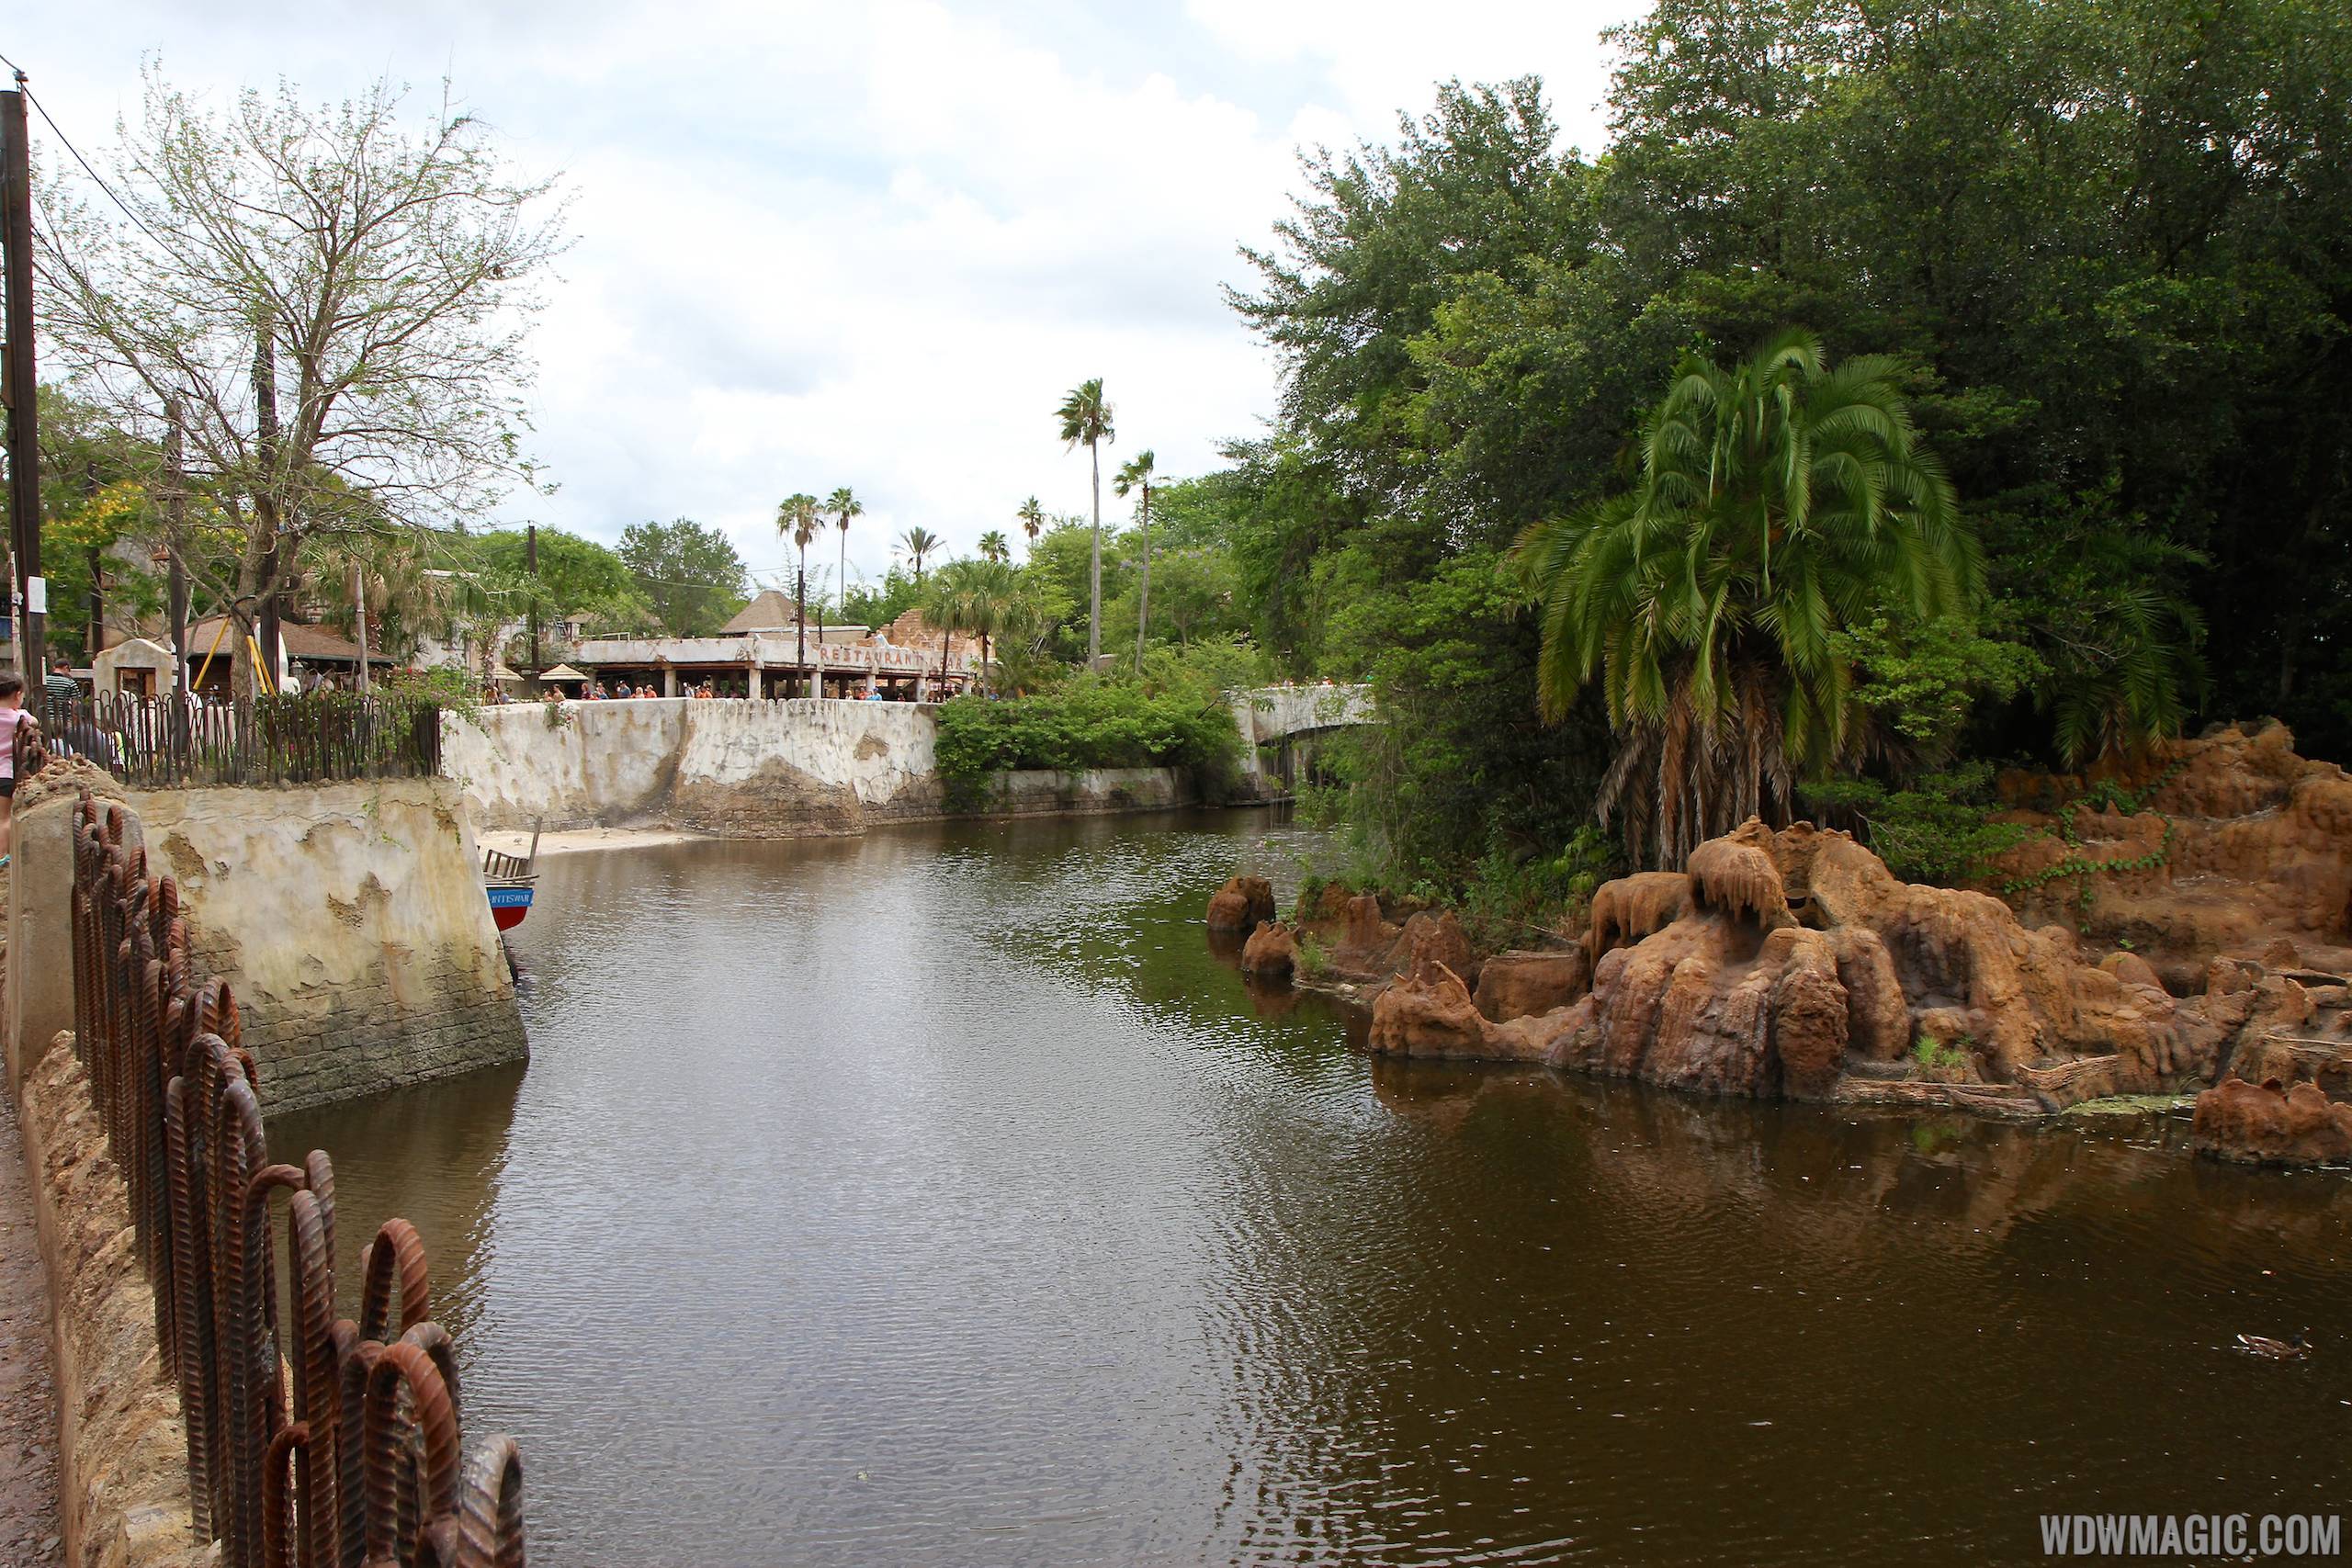 New Harambe Theatre area in Africa - Looking back towards Harambe